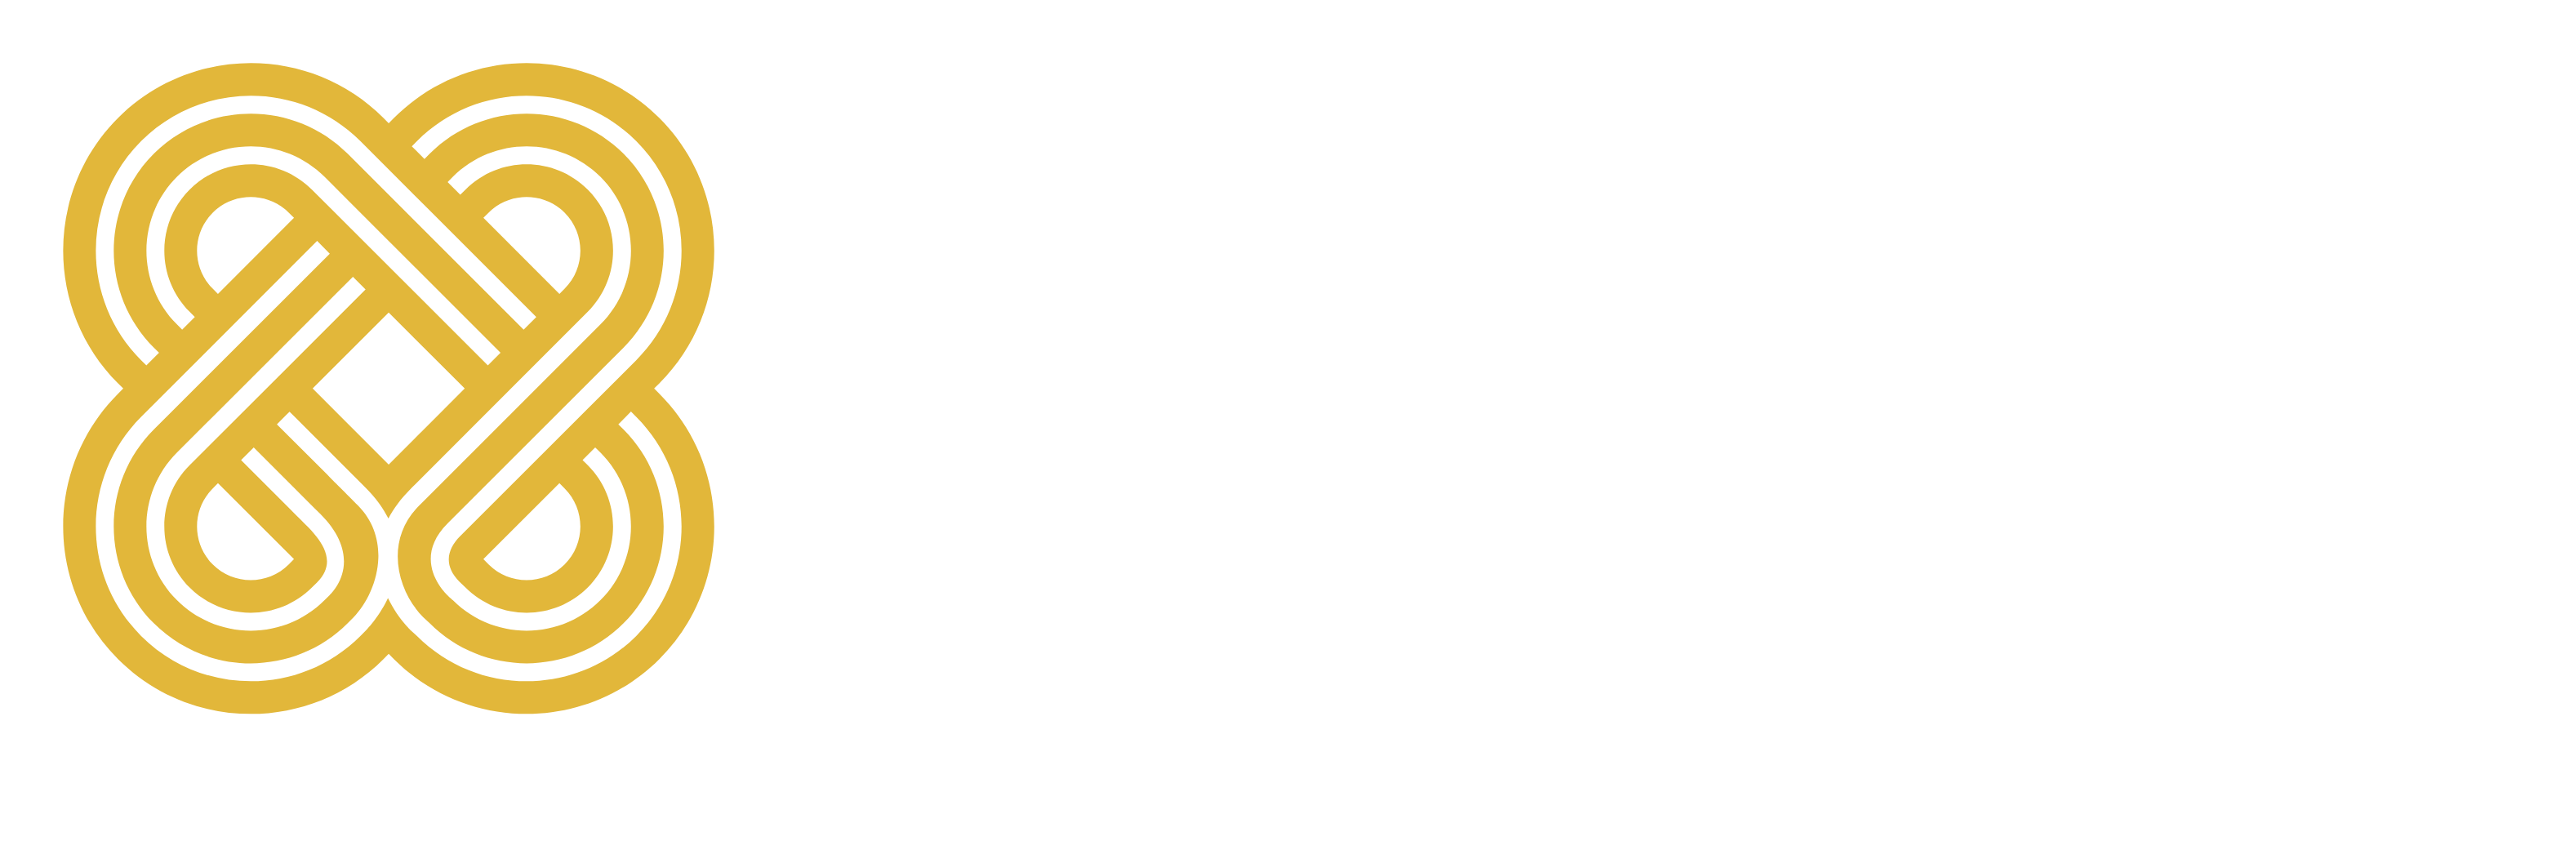 LVR Consulting